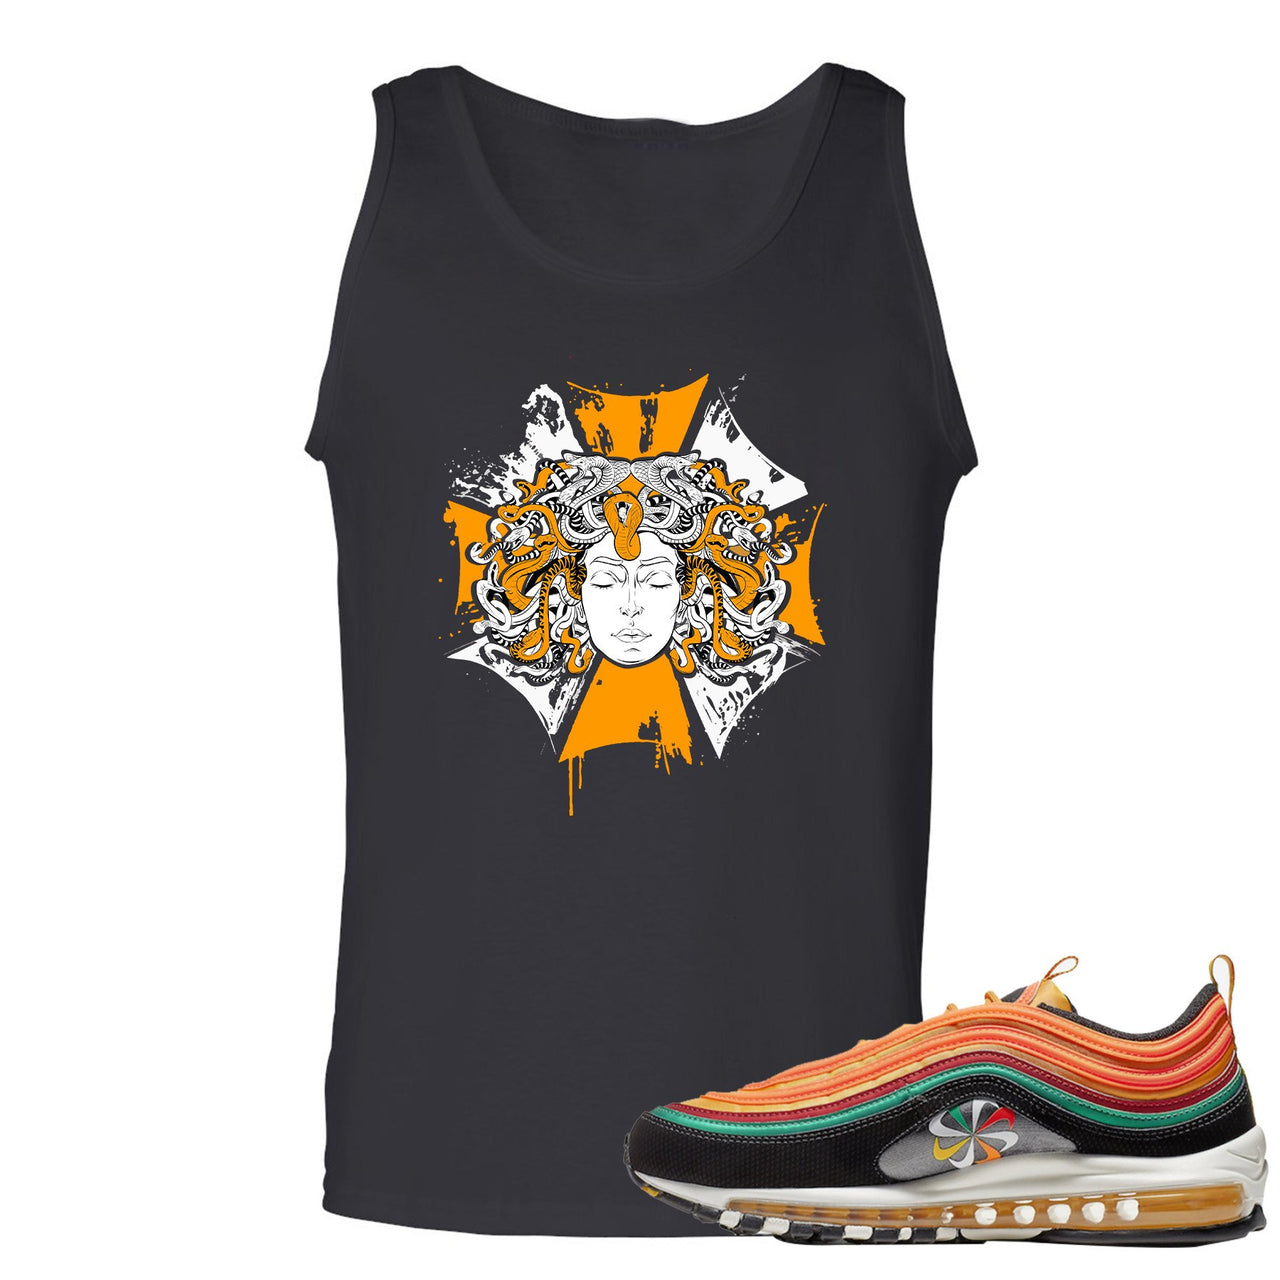 Printed on the front of the Air Max 97 Sunburst black sneaker matching tank top is the Medusa logo